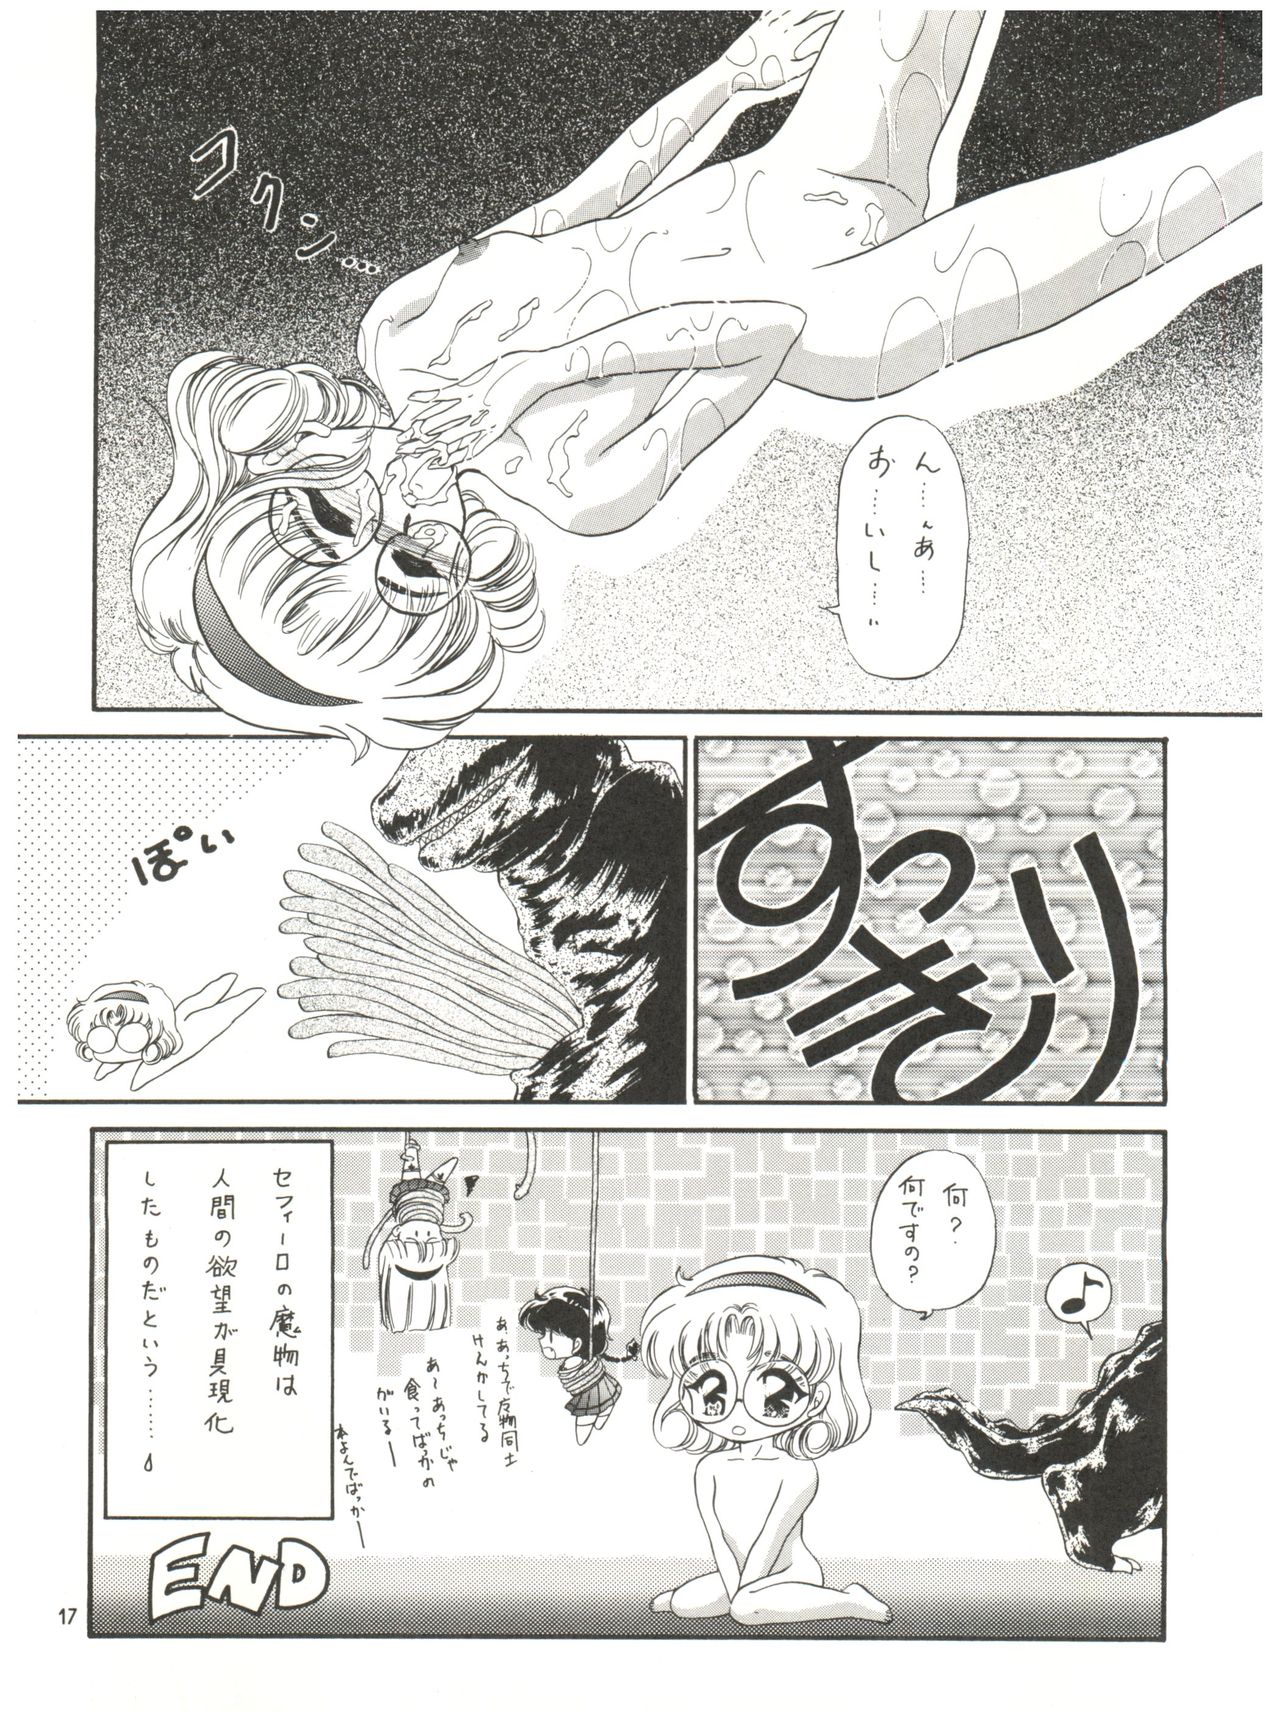 [TRAP (Urano Mami)] DELICIOUS 2nd STAGE (Magic Knight Rayearth) page 17 full